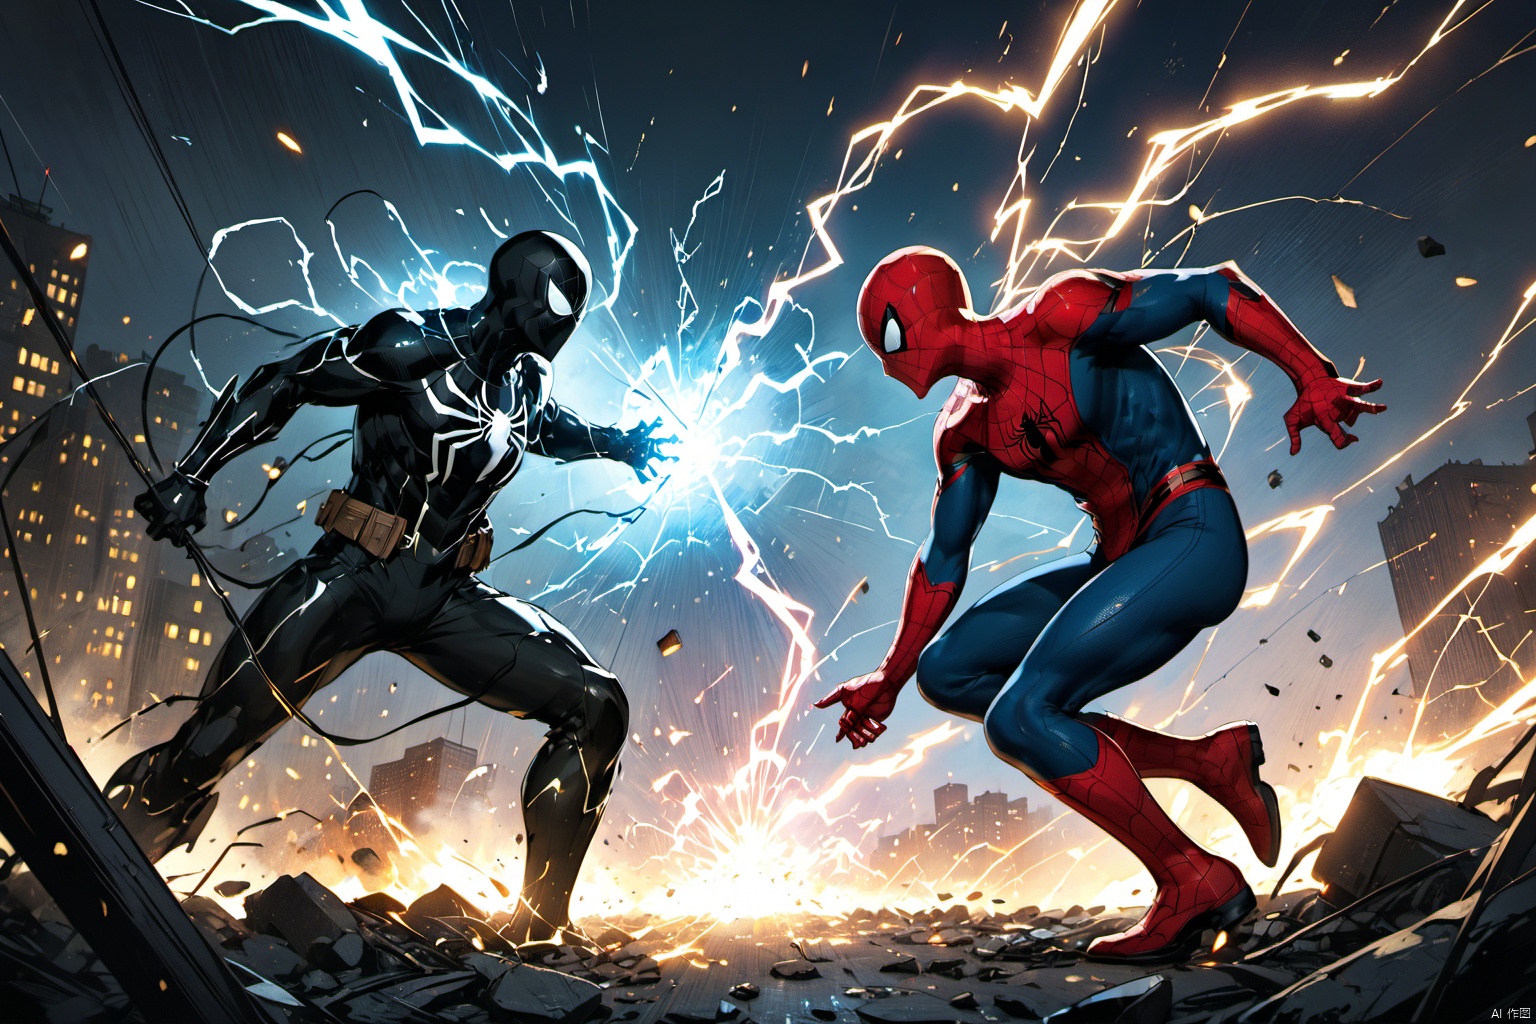  ultra-detailed,(best quality),((masterpiece)),(highres),original,extremely detailed 8K wallpaper,(an extremely delicate and beautiful),anime, (solo:1.3), 
2boys,
An anime illustration depicting Spider-Man facing off against Electro, standing face to face in a tense atmosphere. Debris flies around them, and sparks of electricity crackle in the air. The composition is split in half, with Spider-Man exuding heroism and Electro emanating an evil presence, showcasing emotional tension. The artwork is full of vitality and emotion, truly captivating to the viewer.